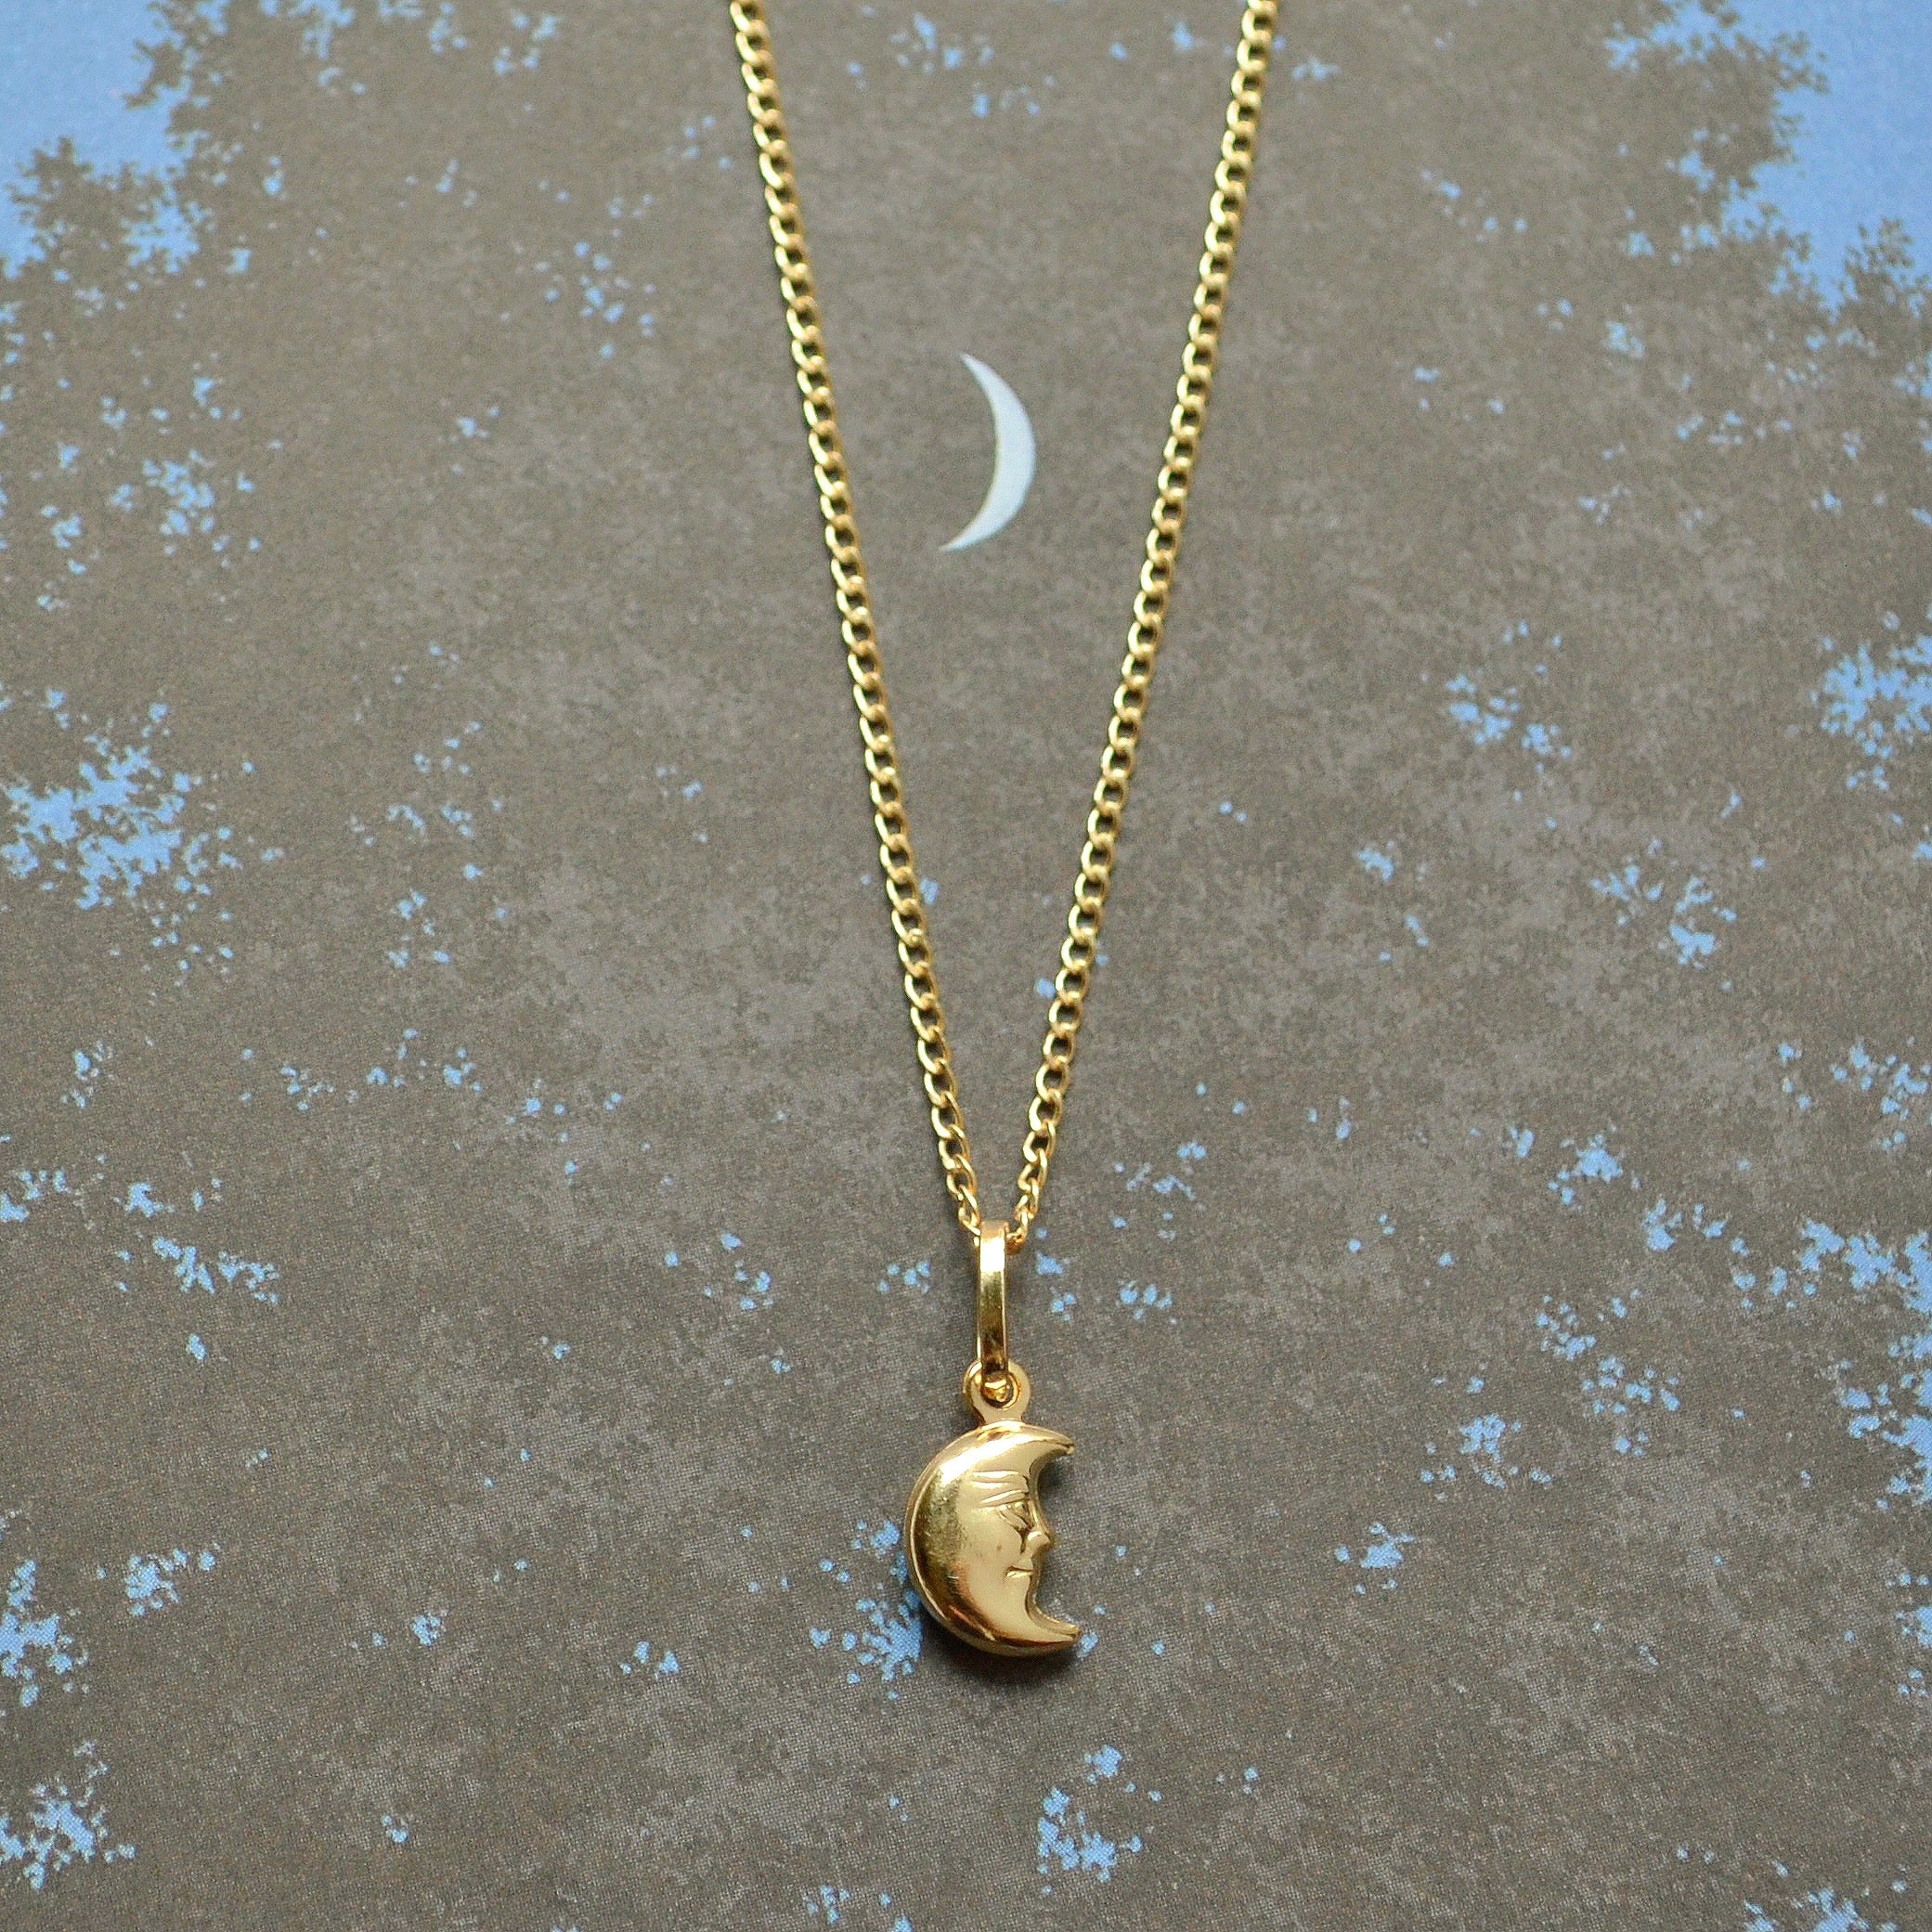 5 Crescent Moon Necklaces And Their Celestial Meanings | Monica Rich Kosann